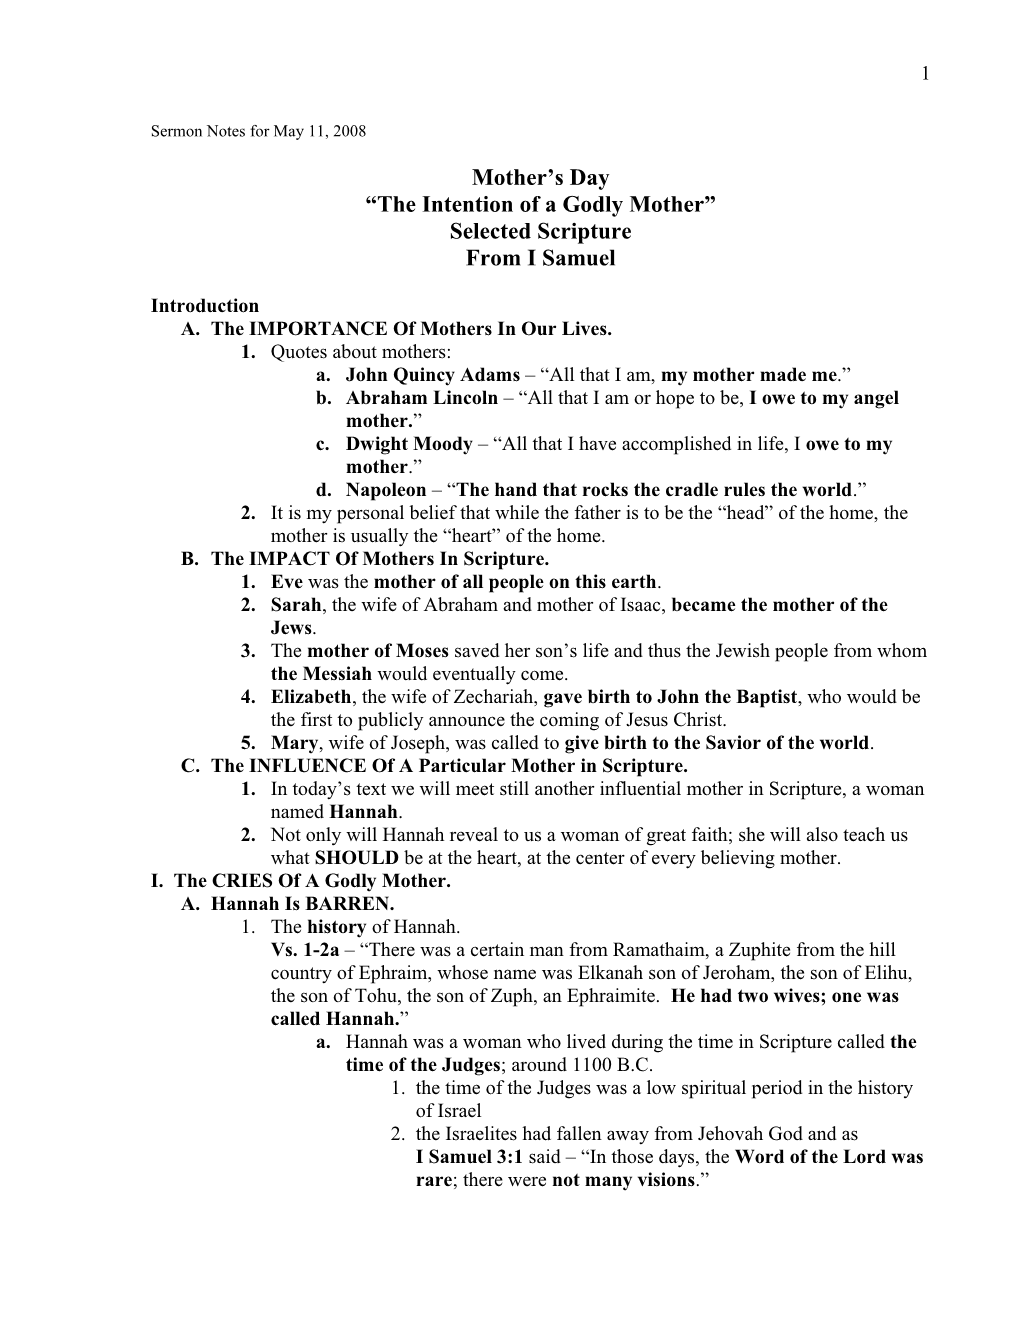 Sermon Notes for May 11, 2008